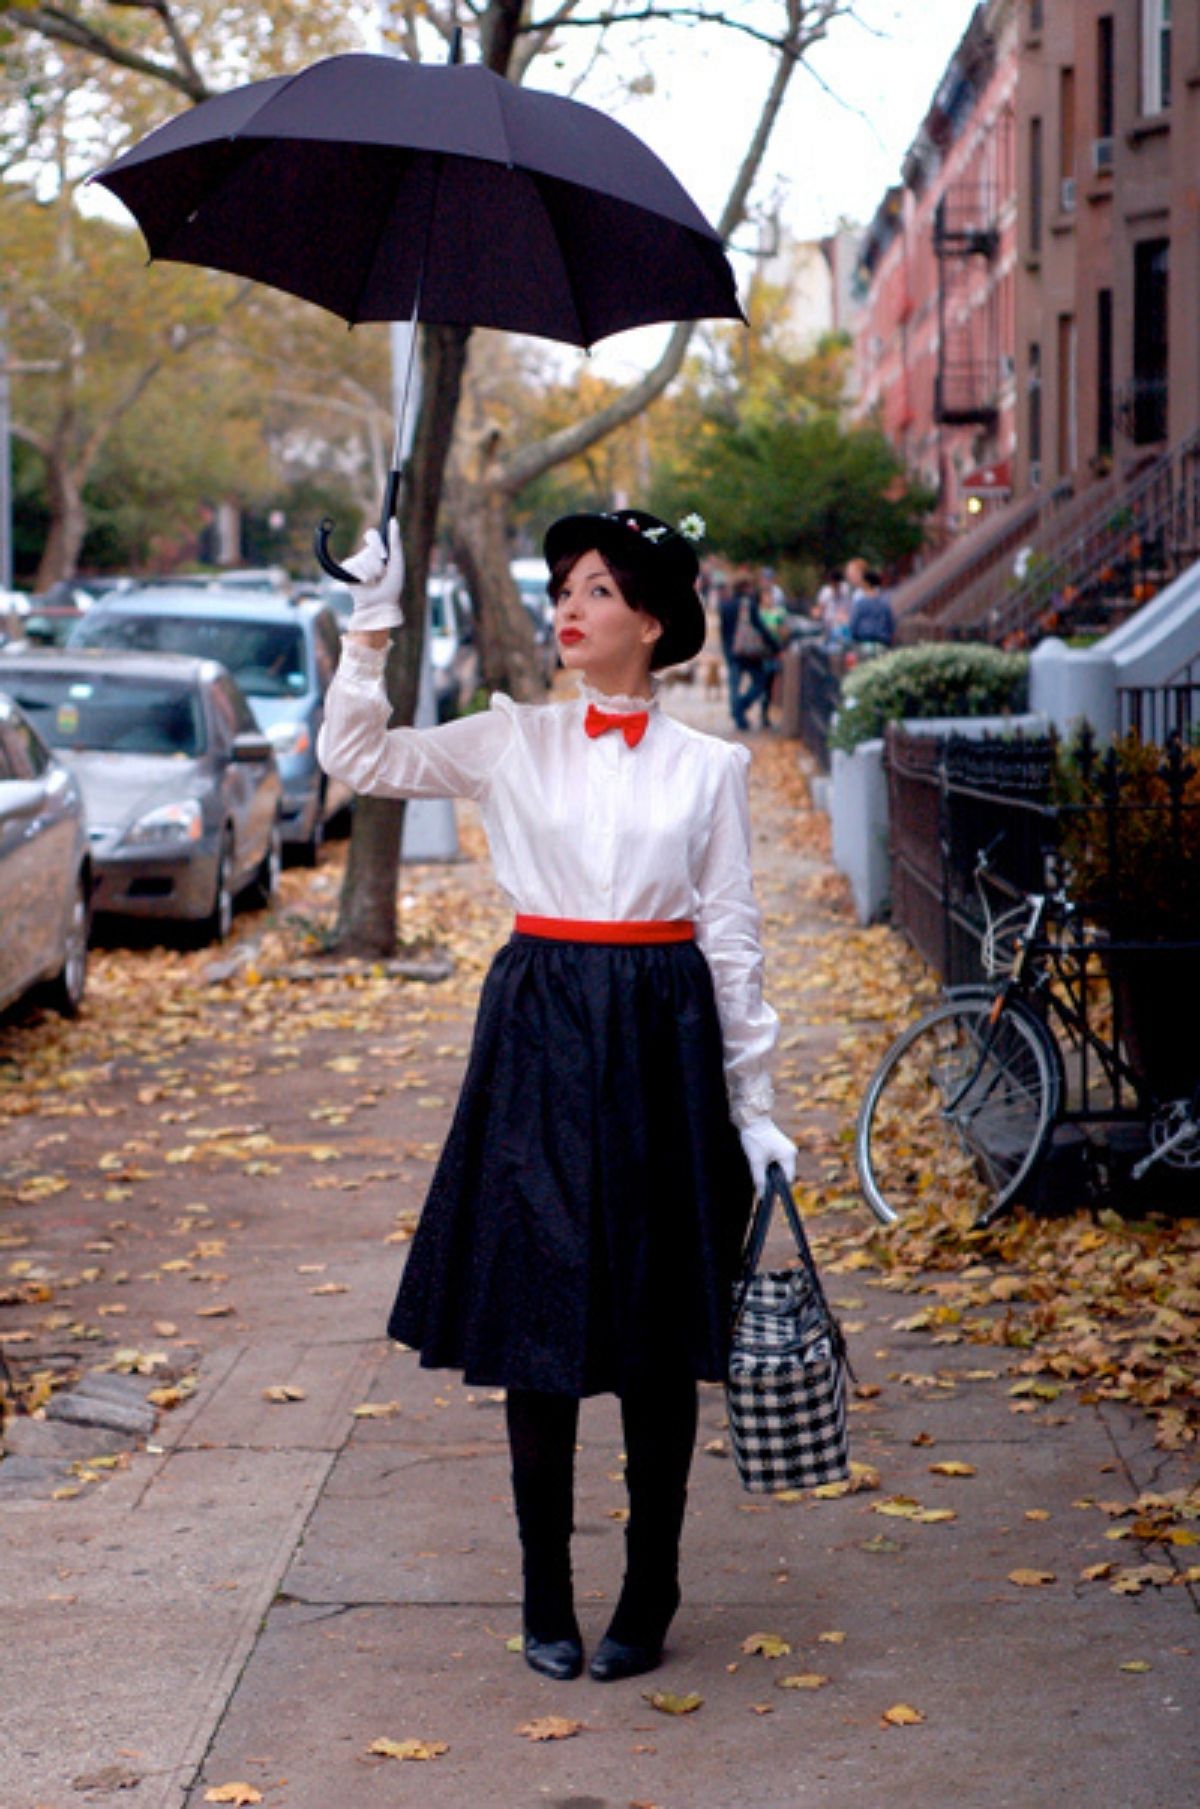 Keiko Lynn's modest Mary Poppins outfit